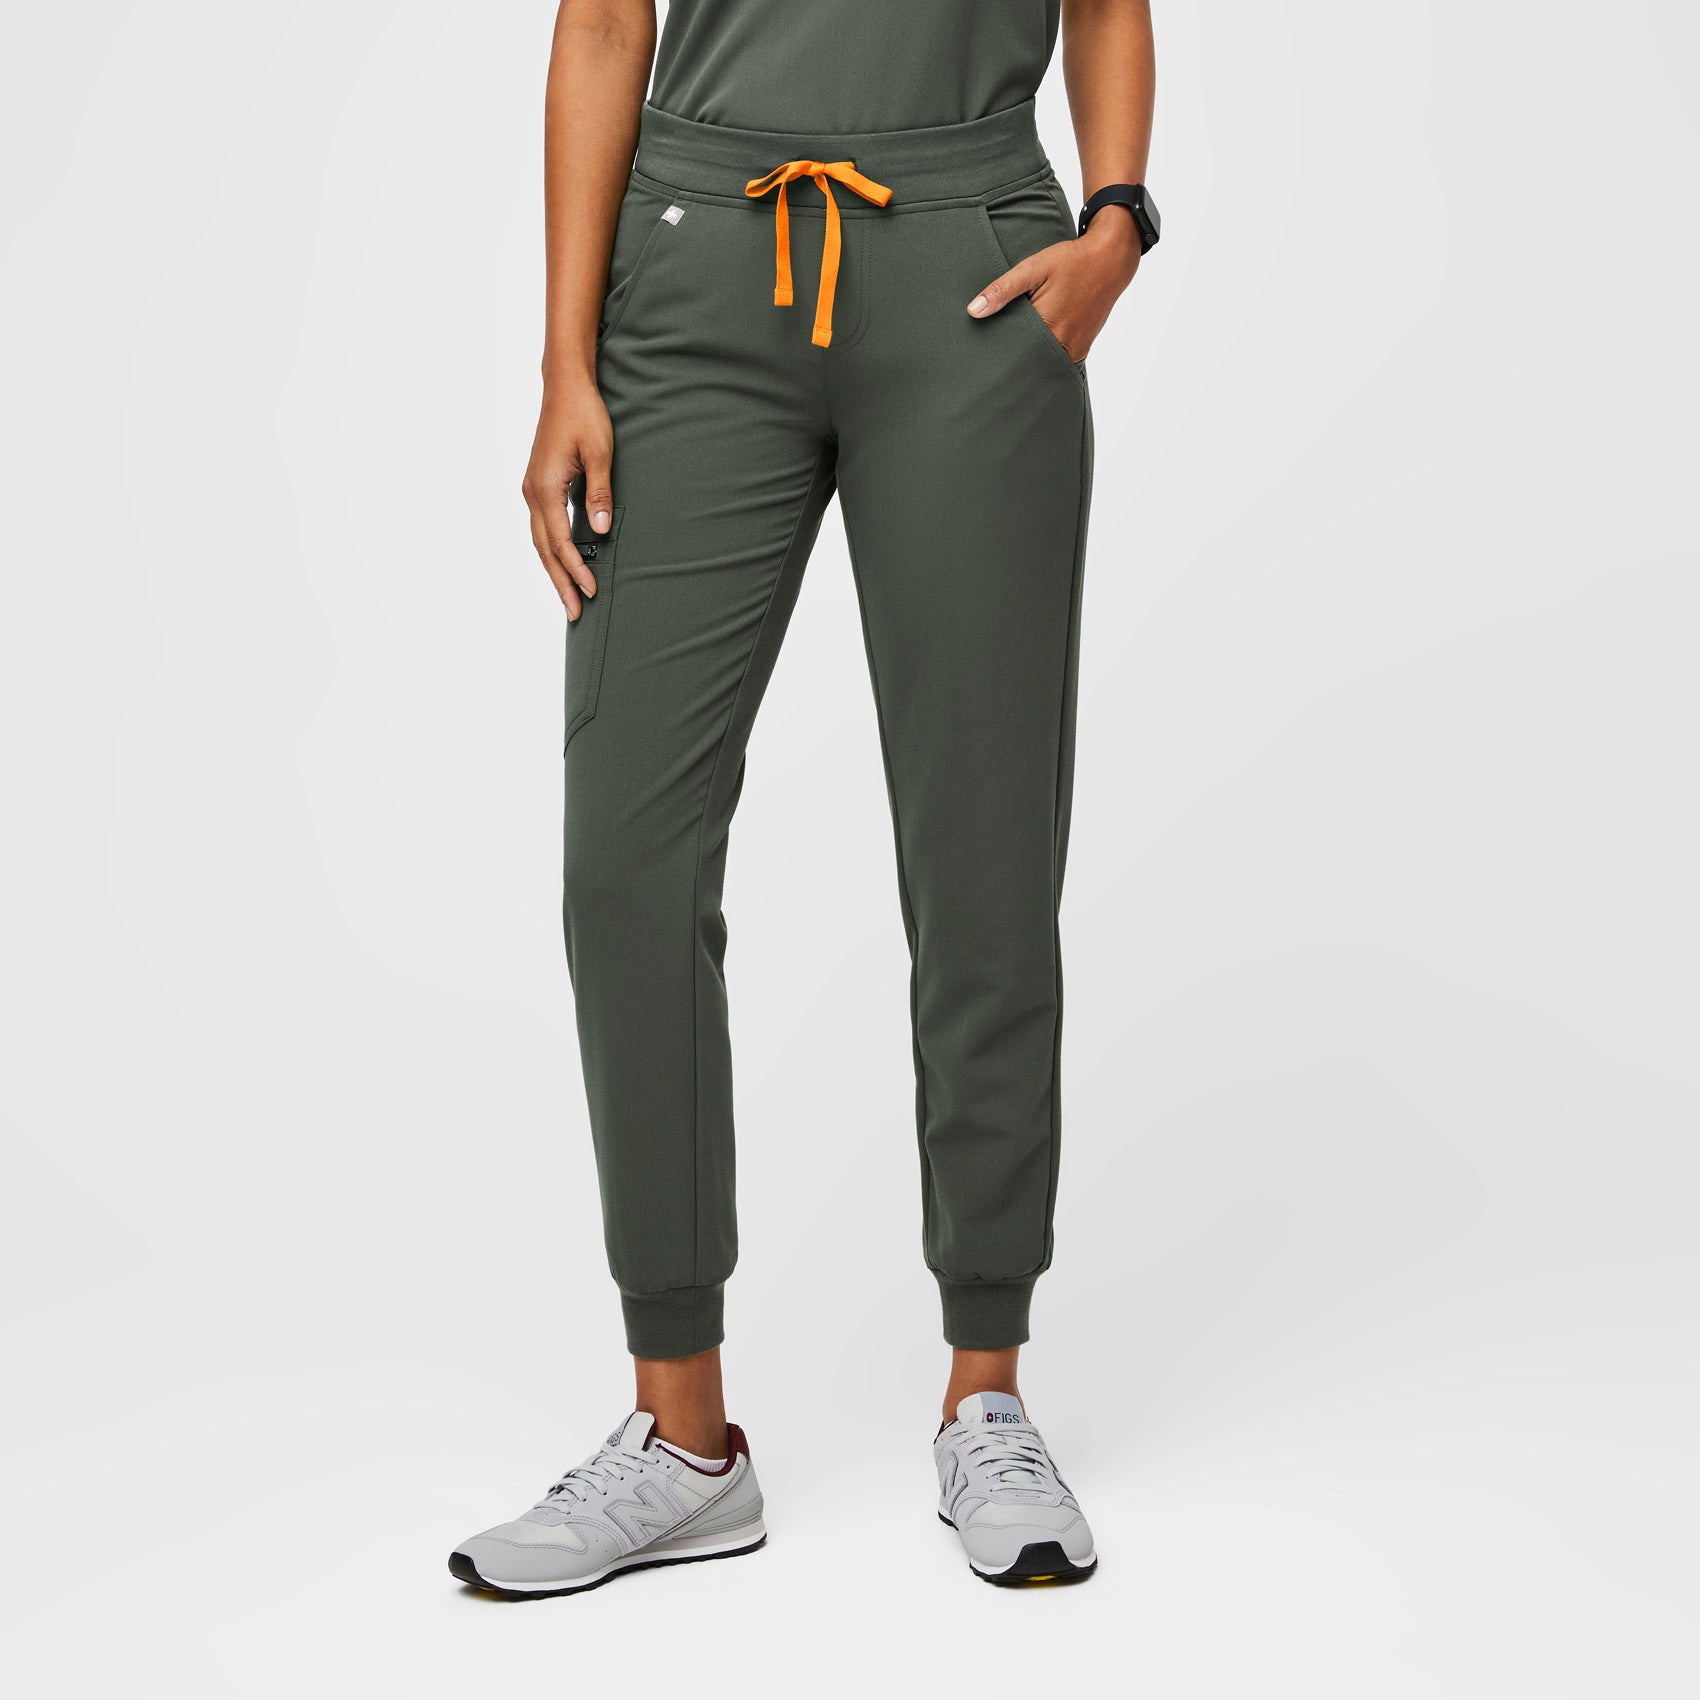 UPDATED* FIGS SCRUB REVIEW  comparing Regular and Tall sized joggers 